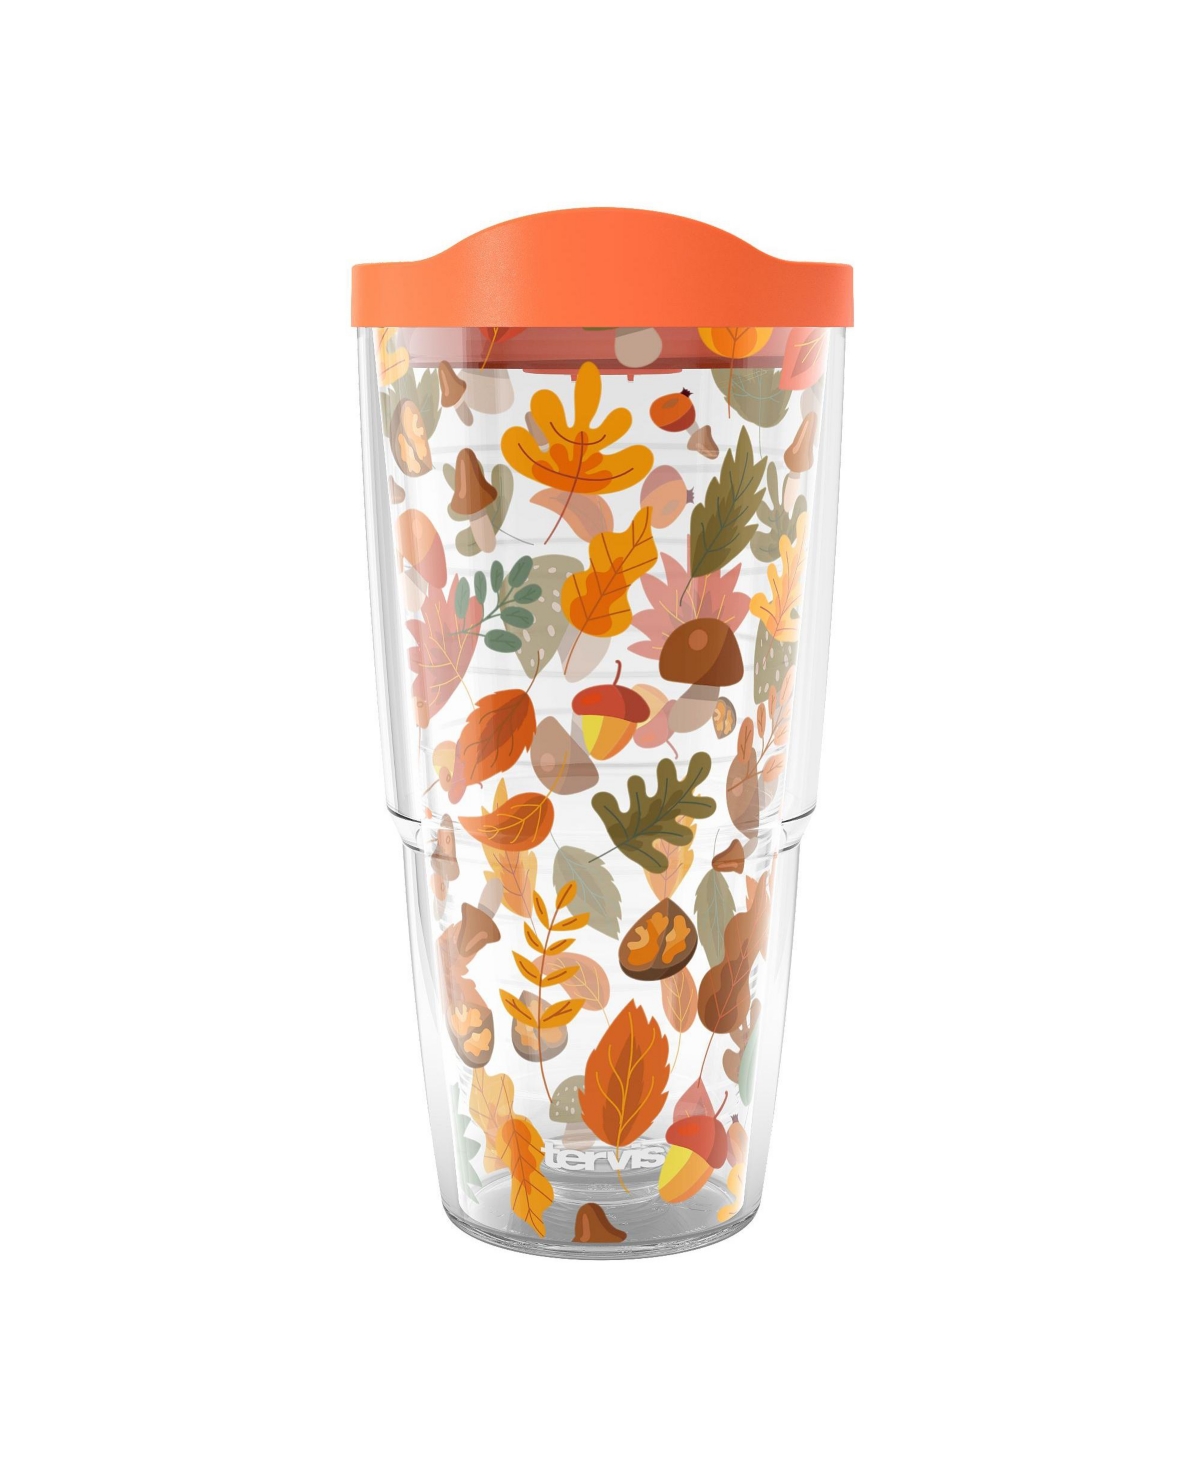 Tervis Tumbler Tervis Awesome Autumn Fall Leaves Made In Usa Double Walled Insulated Tumbler Travel Cup Keeps Drink In Open Miscellaneous